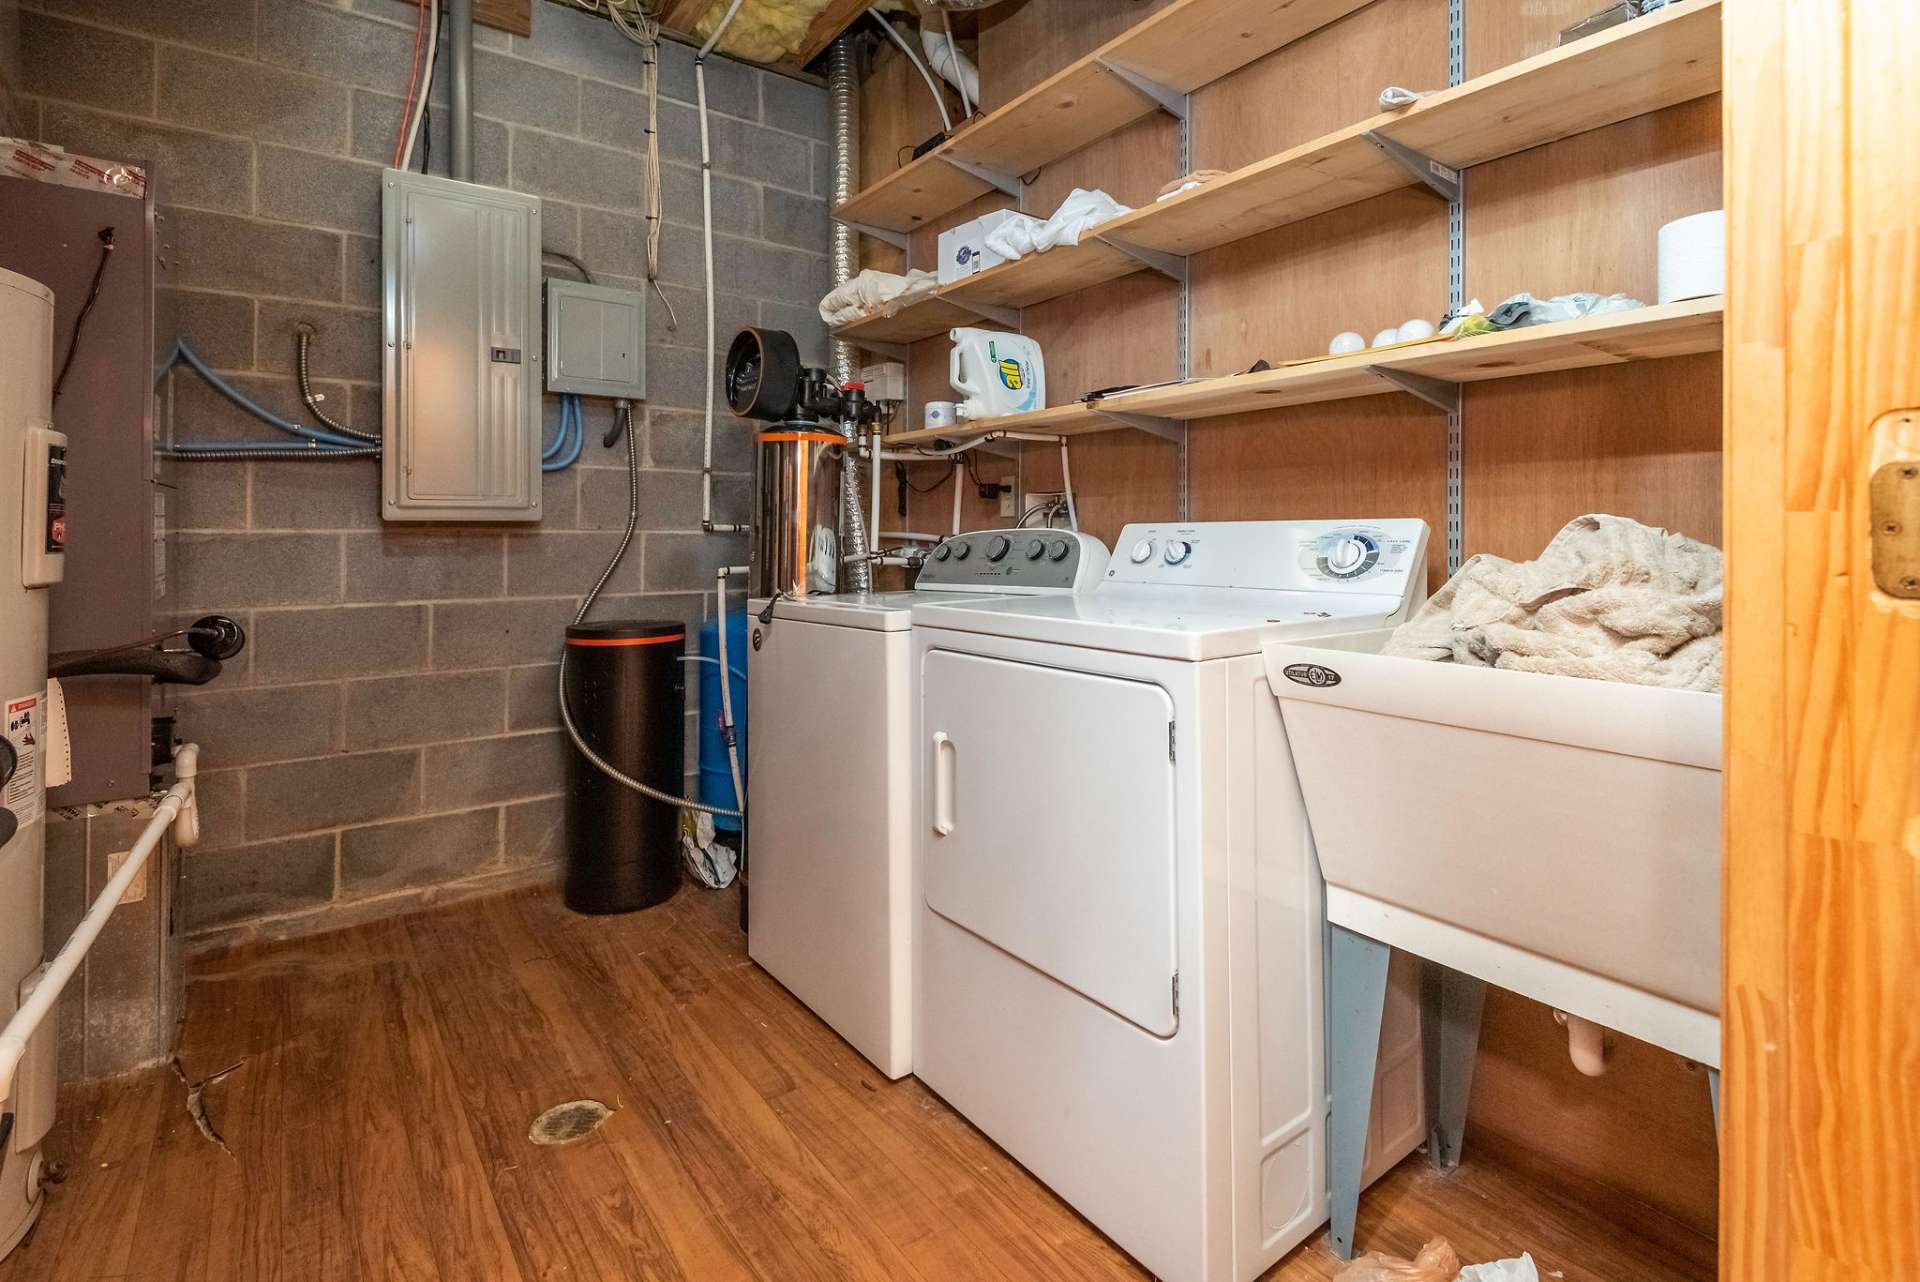 Laundry room equipped with utility sink.